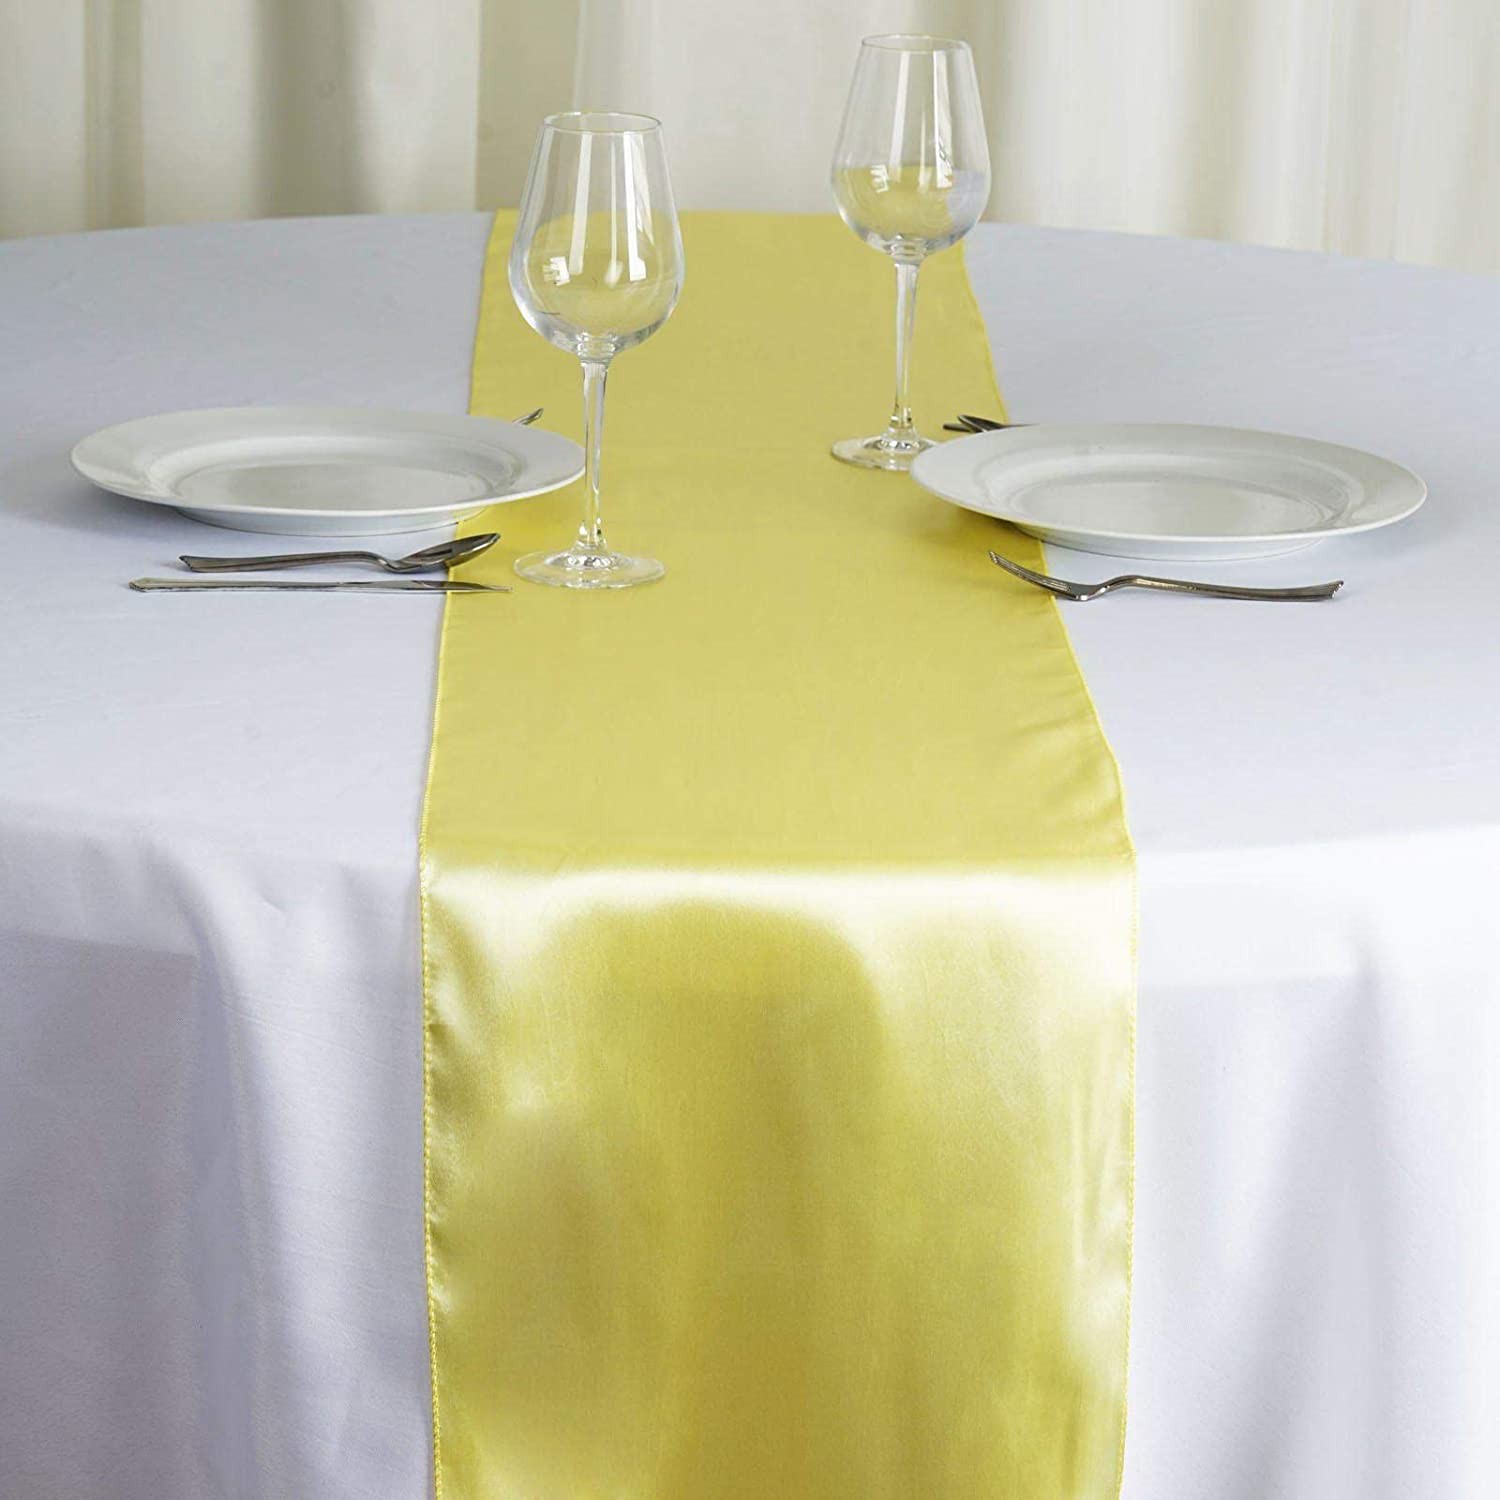 TigerChef Yellow Satin Table Runner, 12" x 108" - 3/Pack